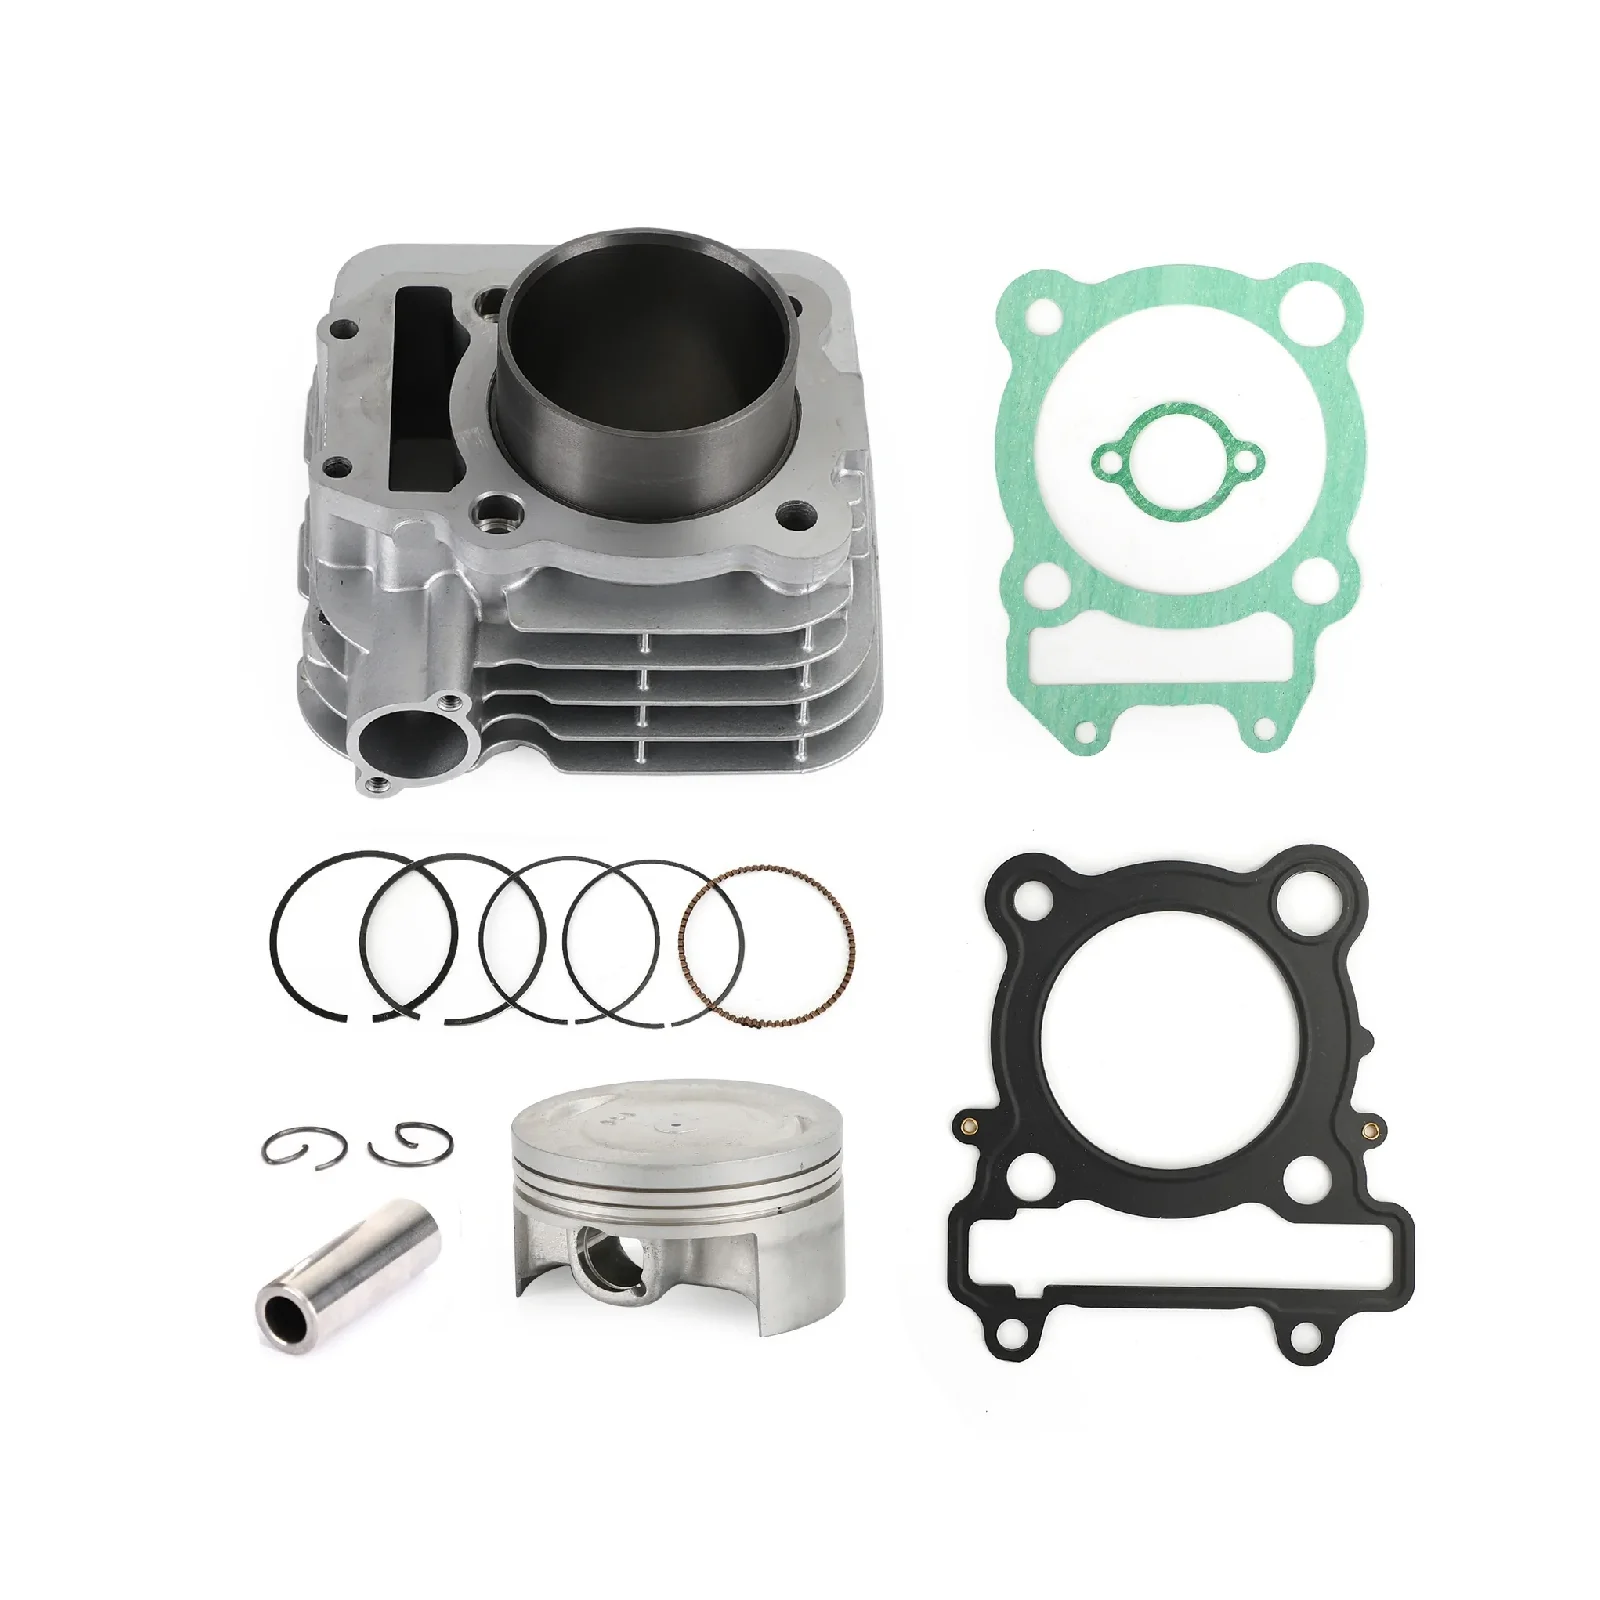 74MM Cylinder Piston Gasket Top End Kit for  Yamaha YBR250 2007-2009 XT250 2013-2015 1S4-11311-00-A0 1S4-11311-01-A0